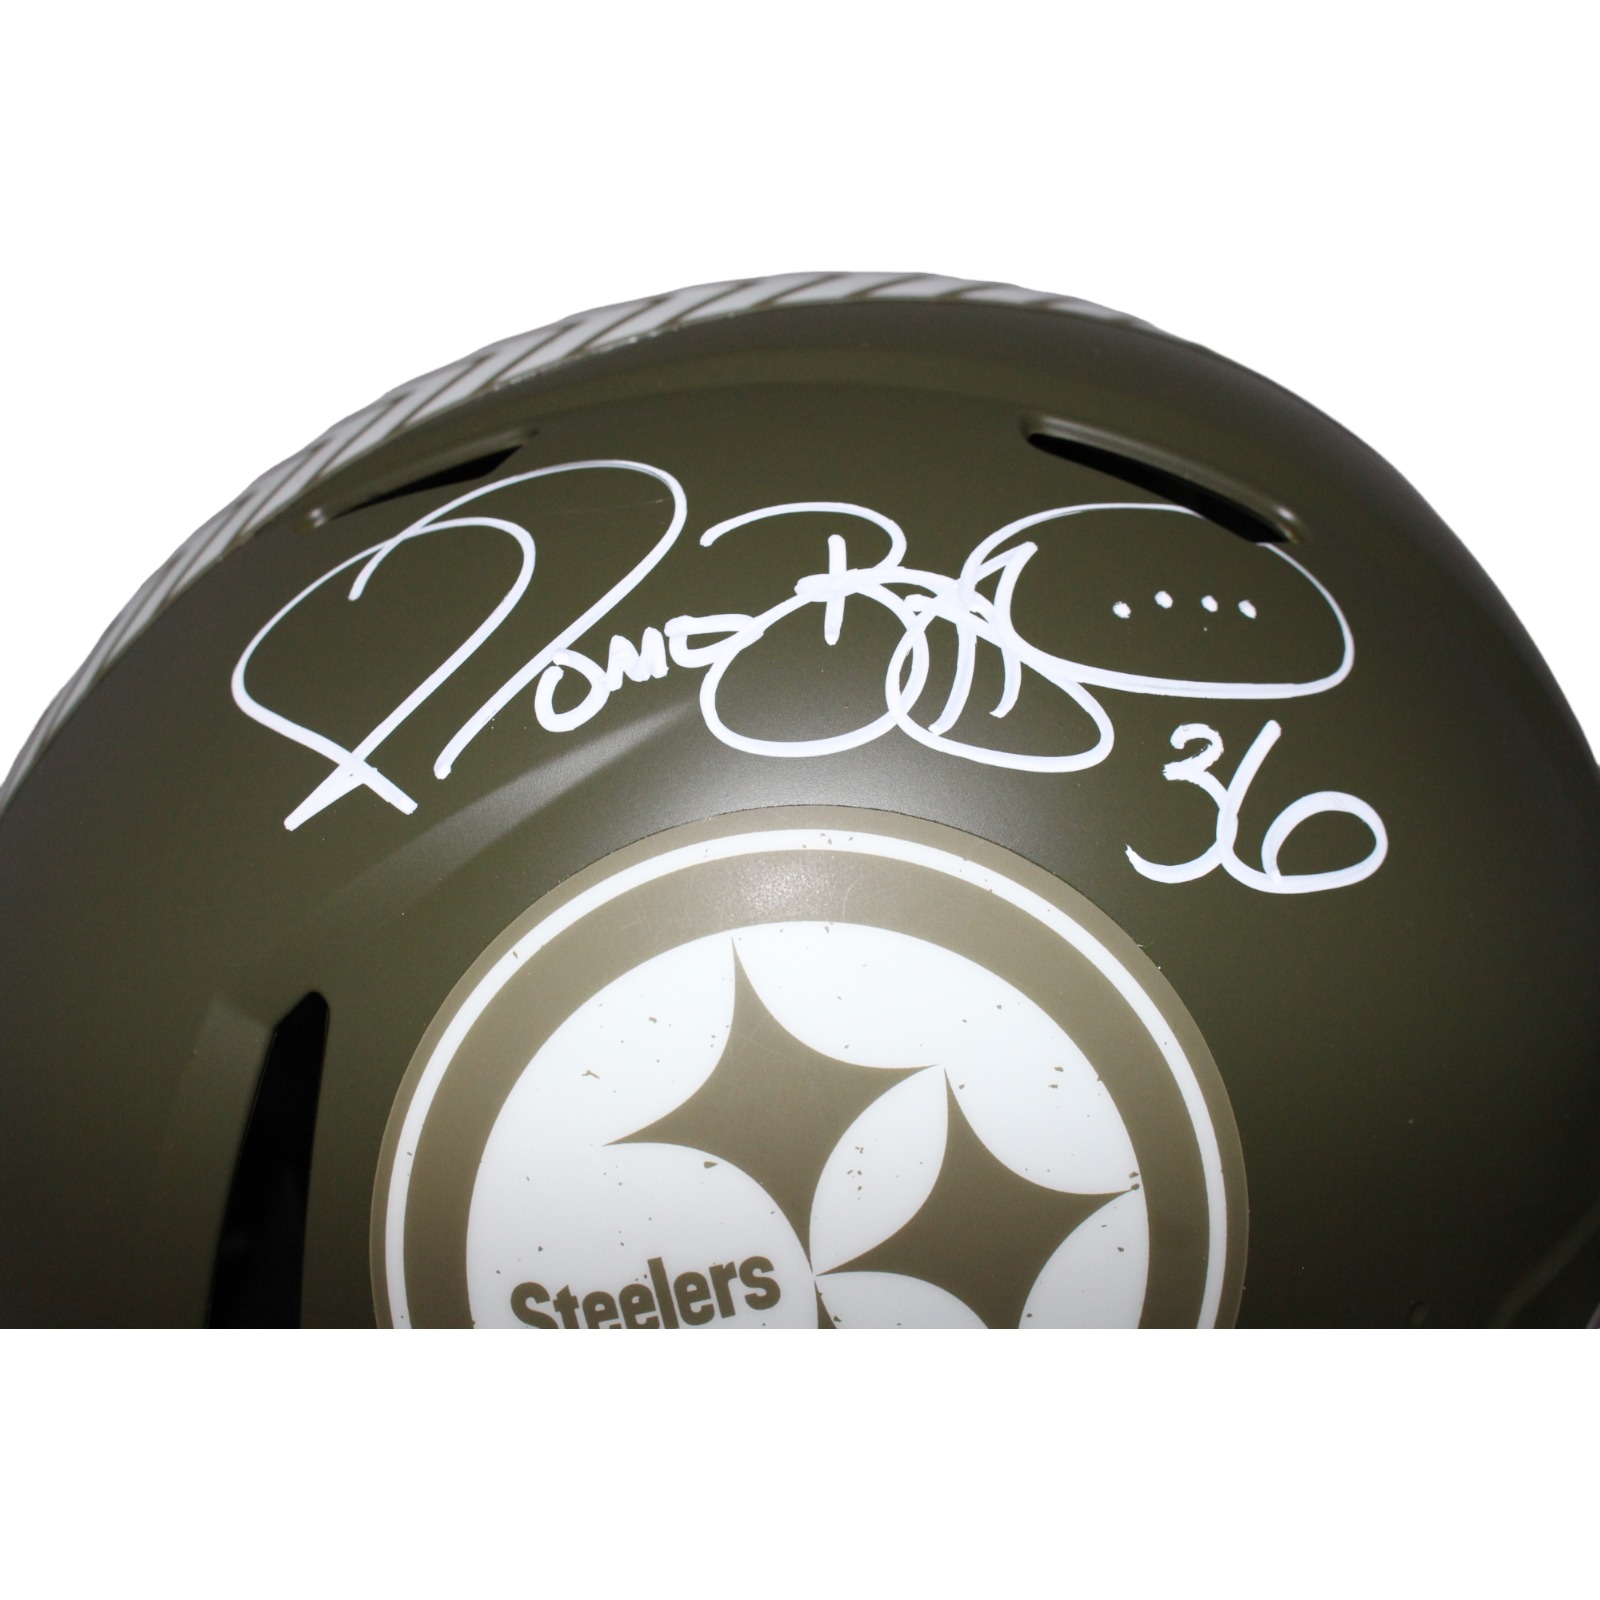 Jerome Bettis Signed Pittsburgh Steelers Authentic Helmet Salute BAS